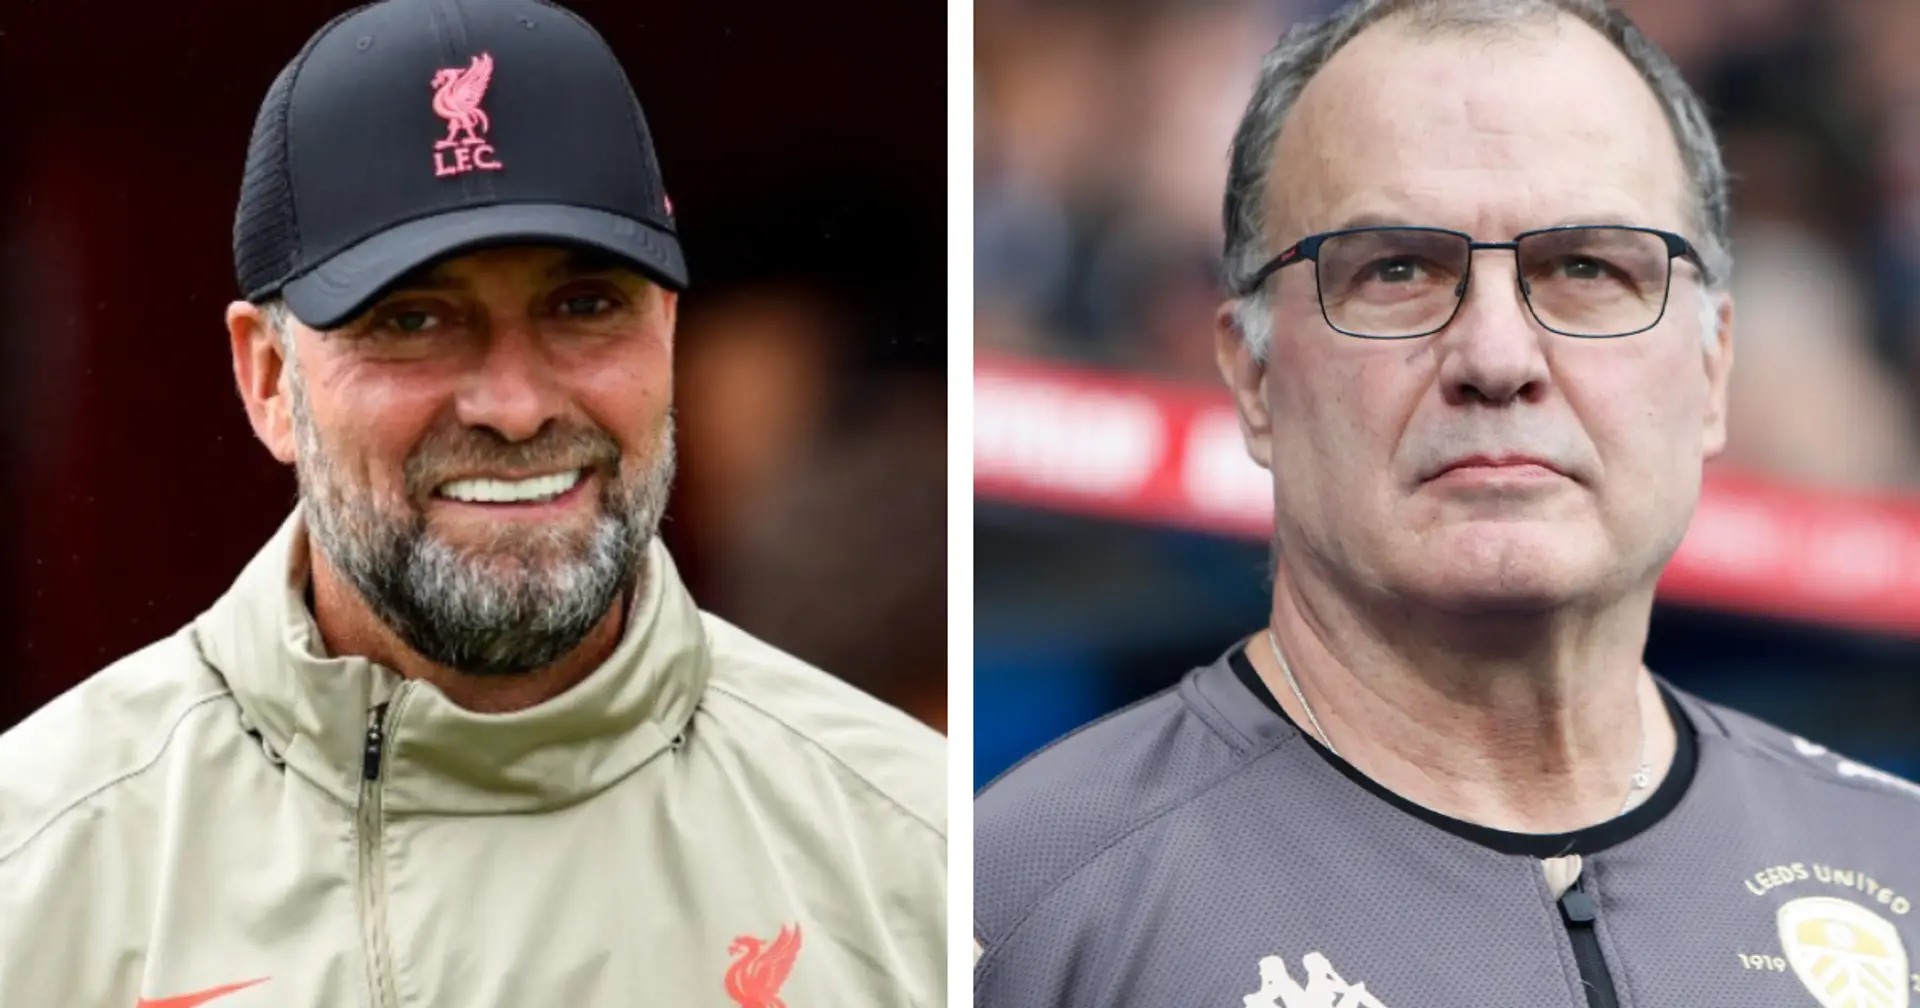 'Klopp facilitated it': Leeds manager Bielsa on how Liverpool's forwards were key to dominant win